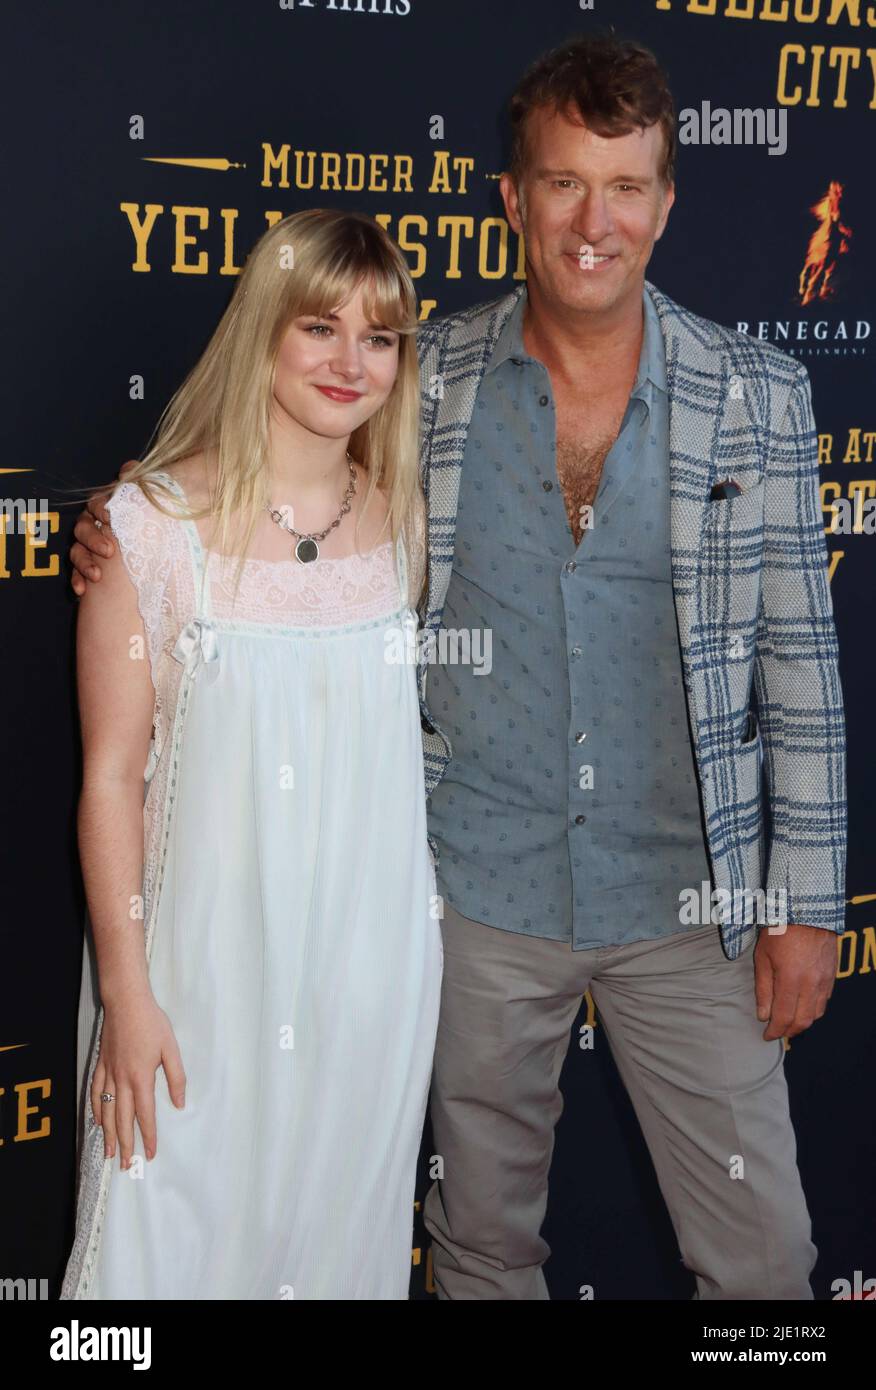 Harlow Jane, Thomas Jane  06/23/2022 The Los Angeles Premiere of “Murder at Yellowstone City” held at the Harmony Gold Theater in Hollywood, CA. Photo by I. Hasegawa / HNW/ Picturelux Stock Photo